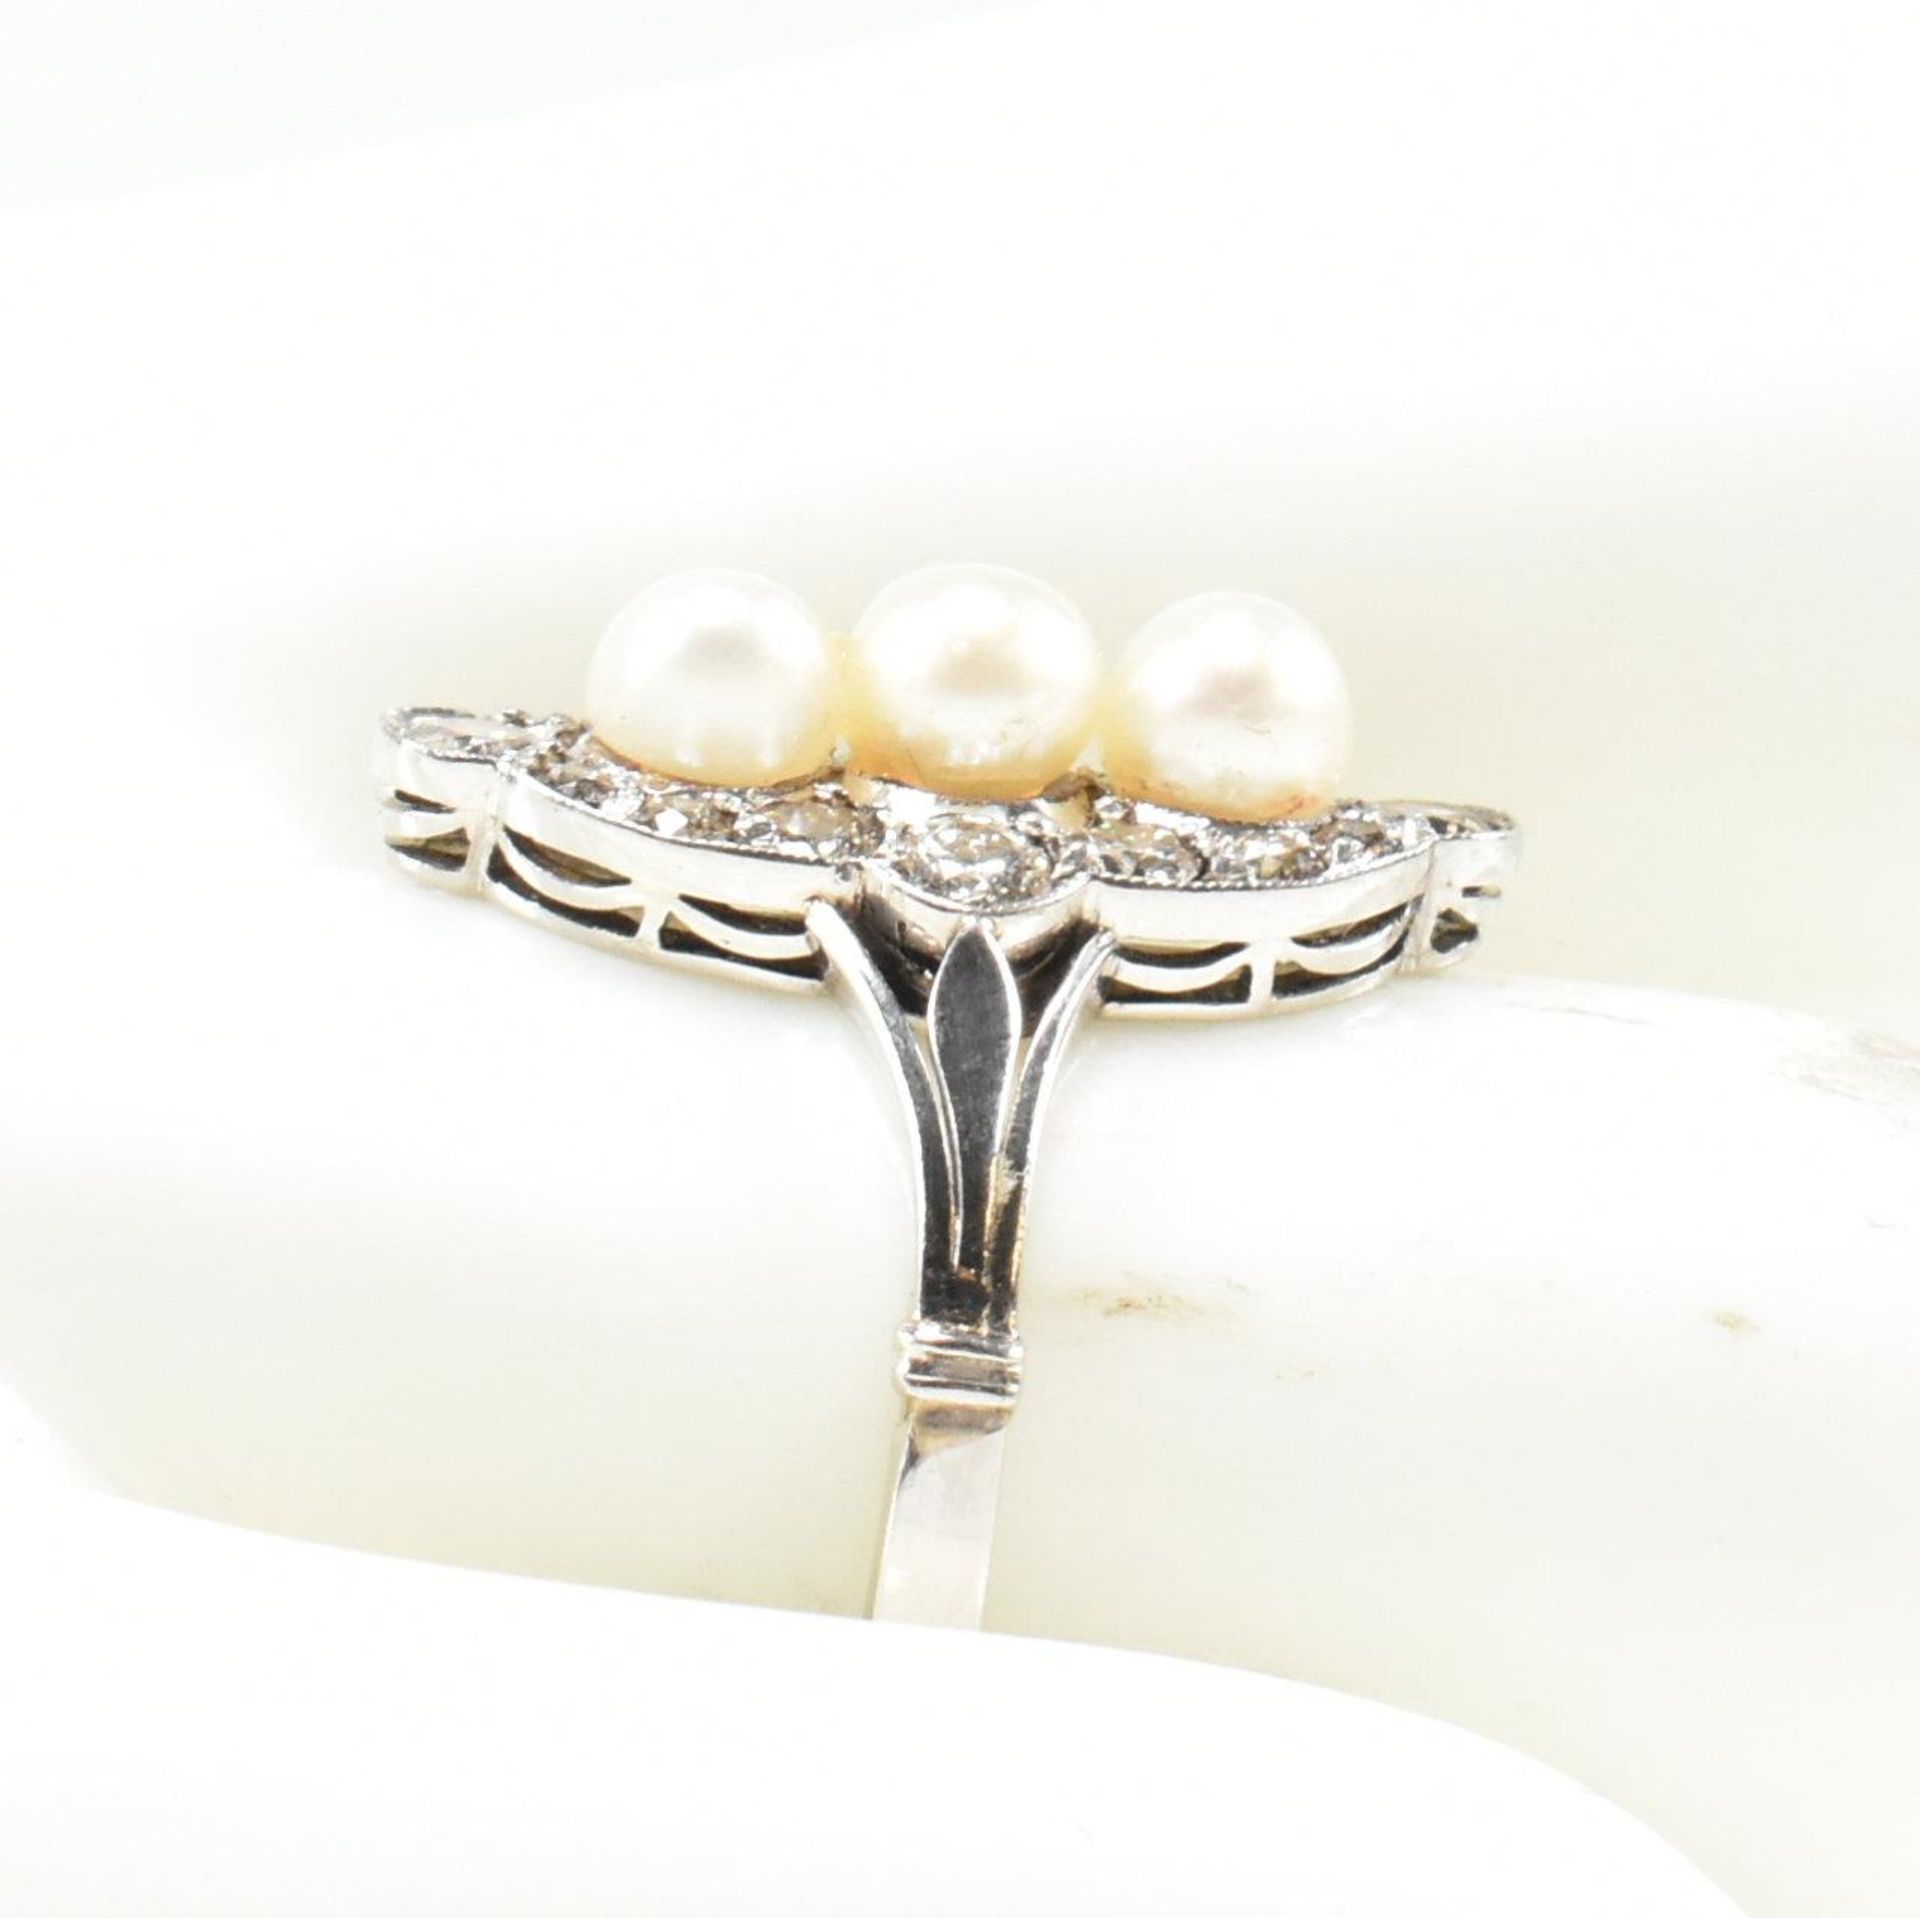 CASED PEARL & DIAMOND MARQUISE RING - Image 6 of 6